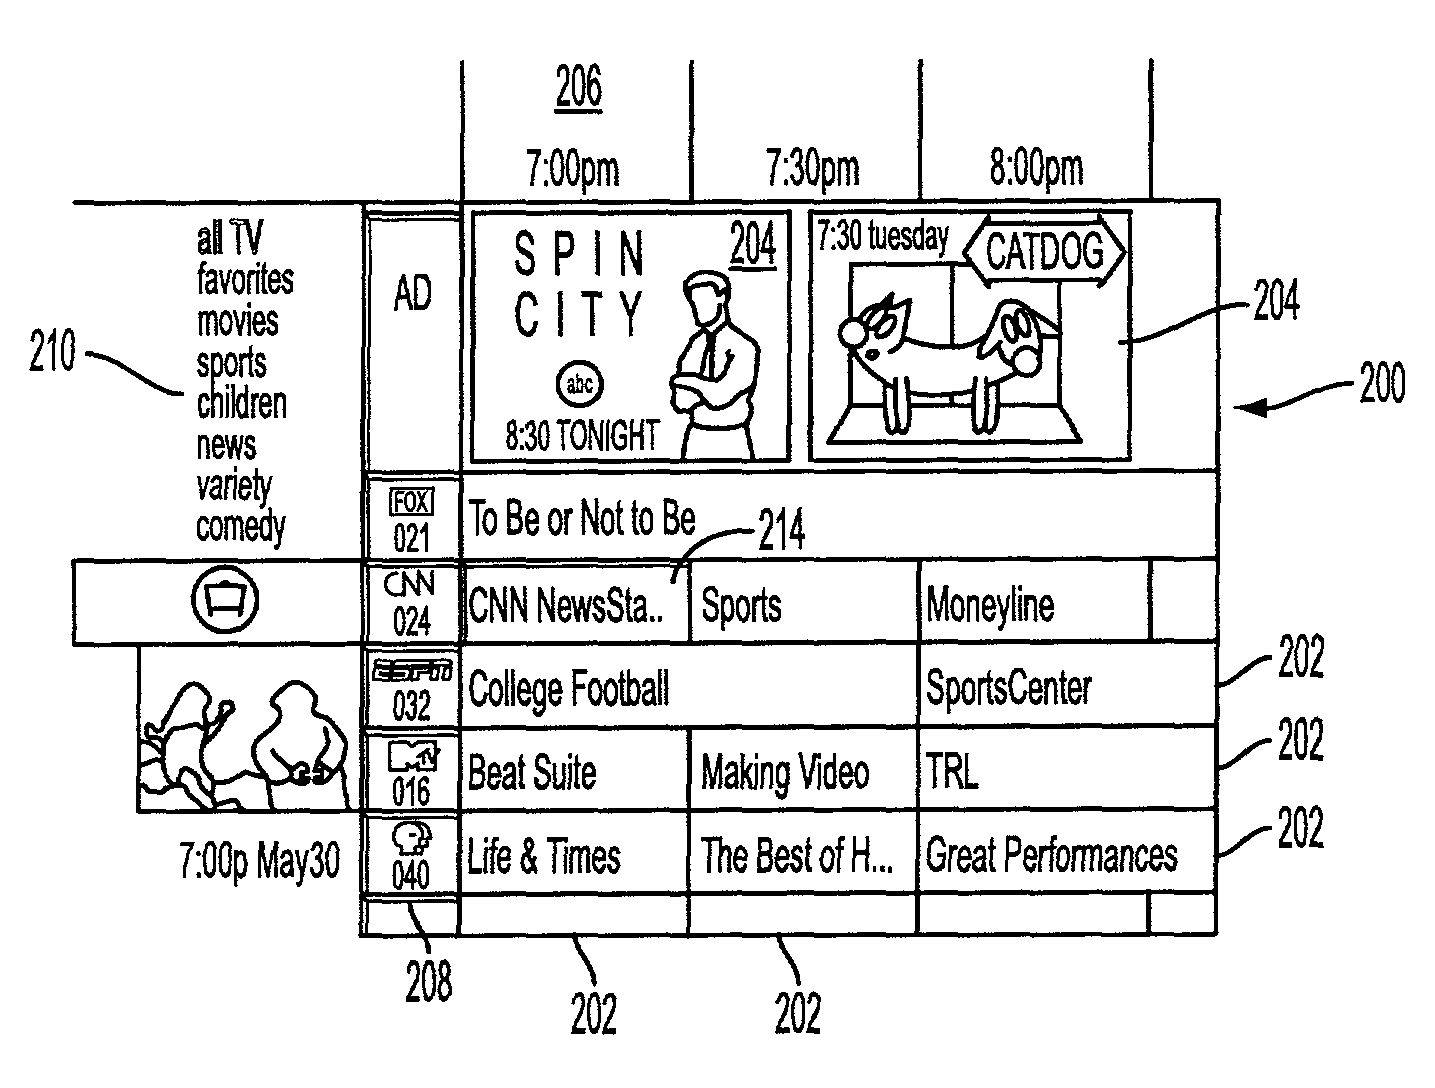 System and method for displaying advertising in an interactive program guide